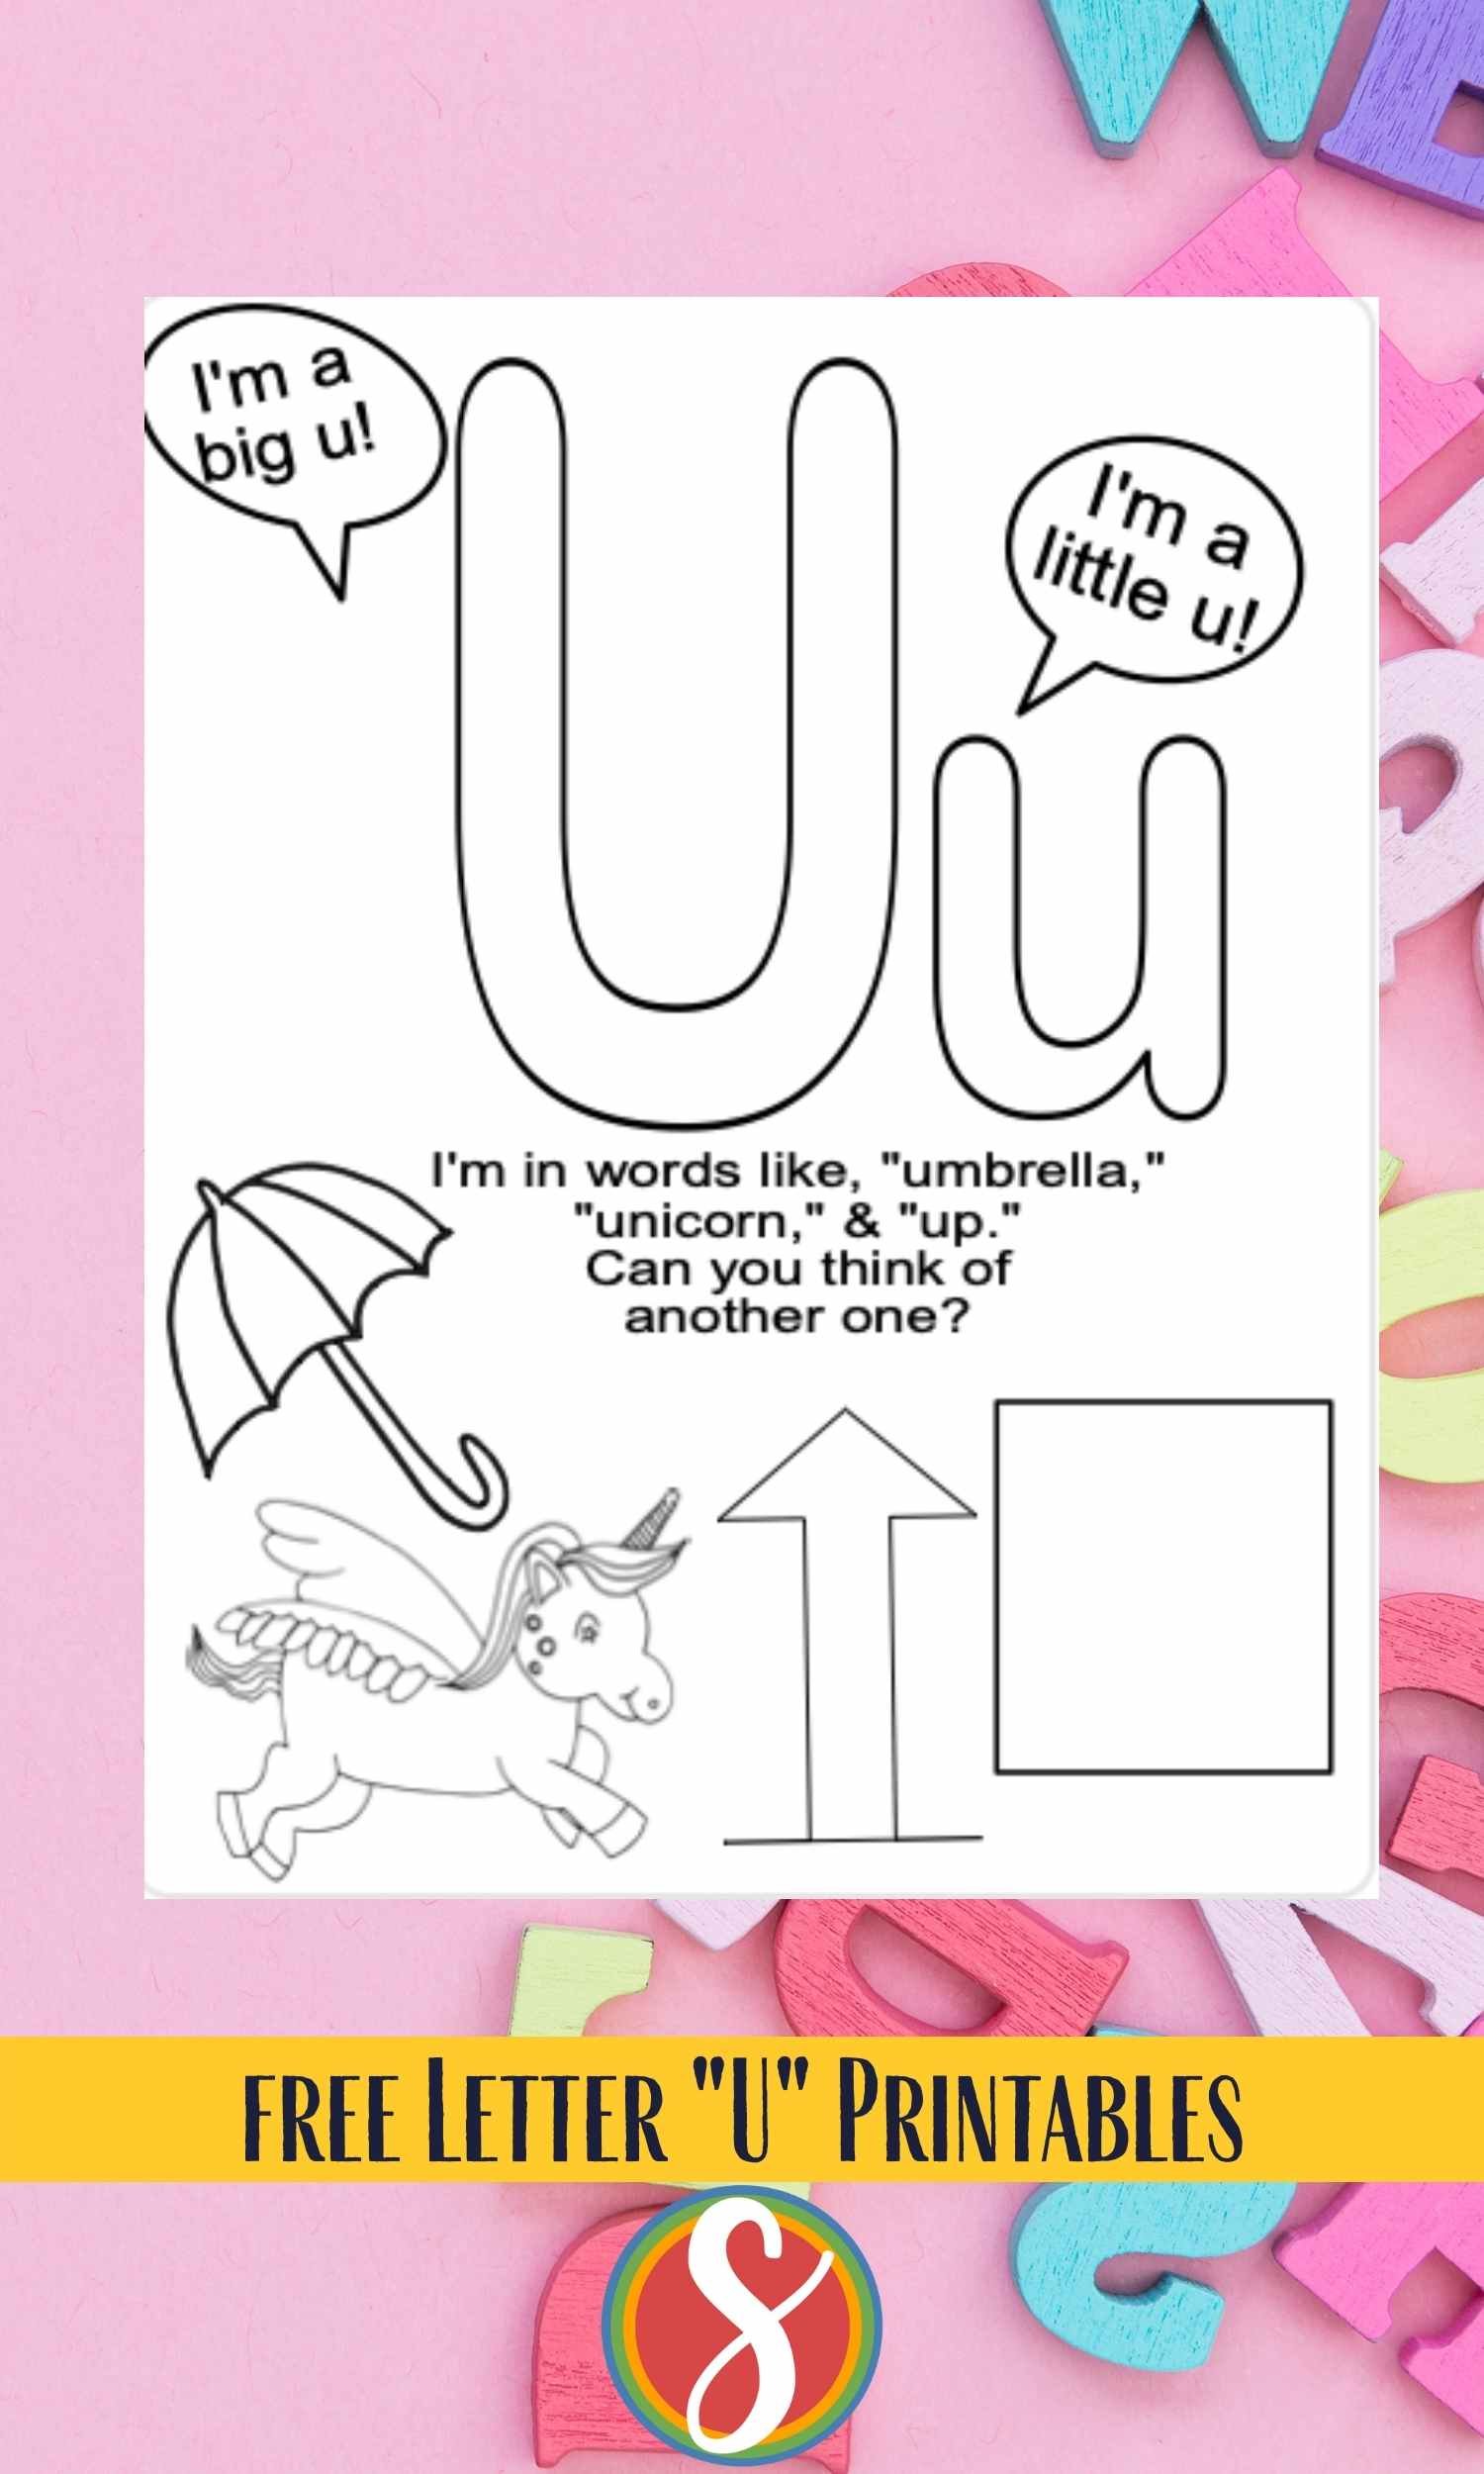 Outline of letters "Uu" with colorable images of unicorn, up arrow, umbrella